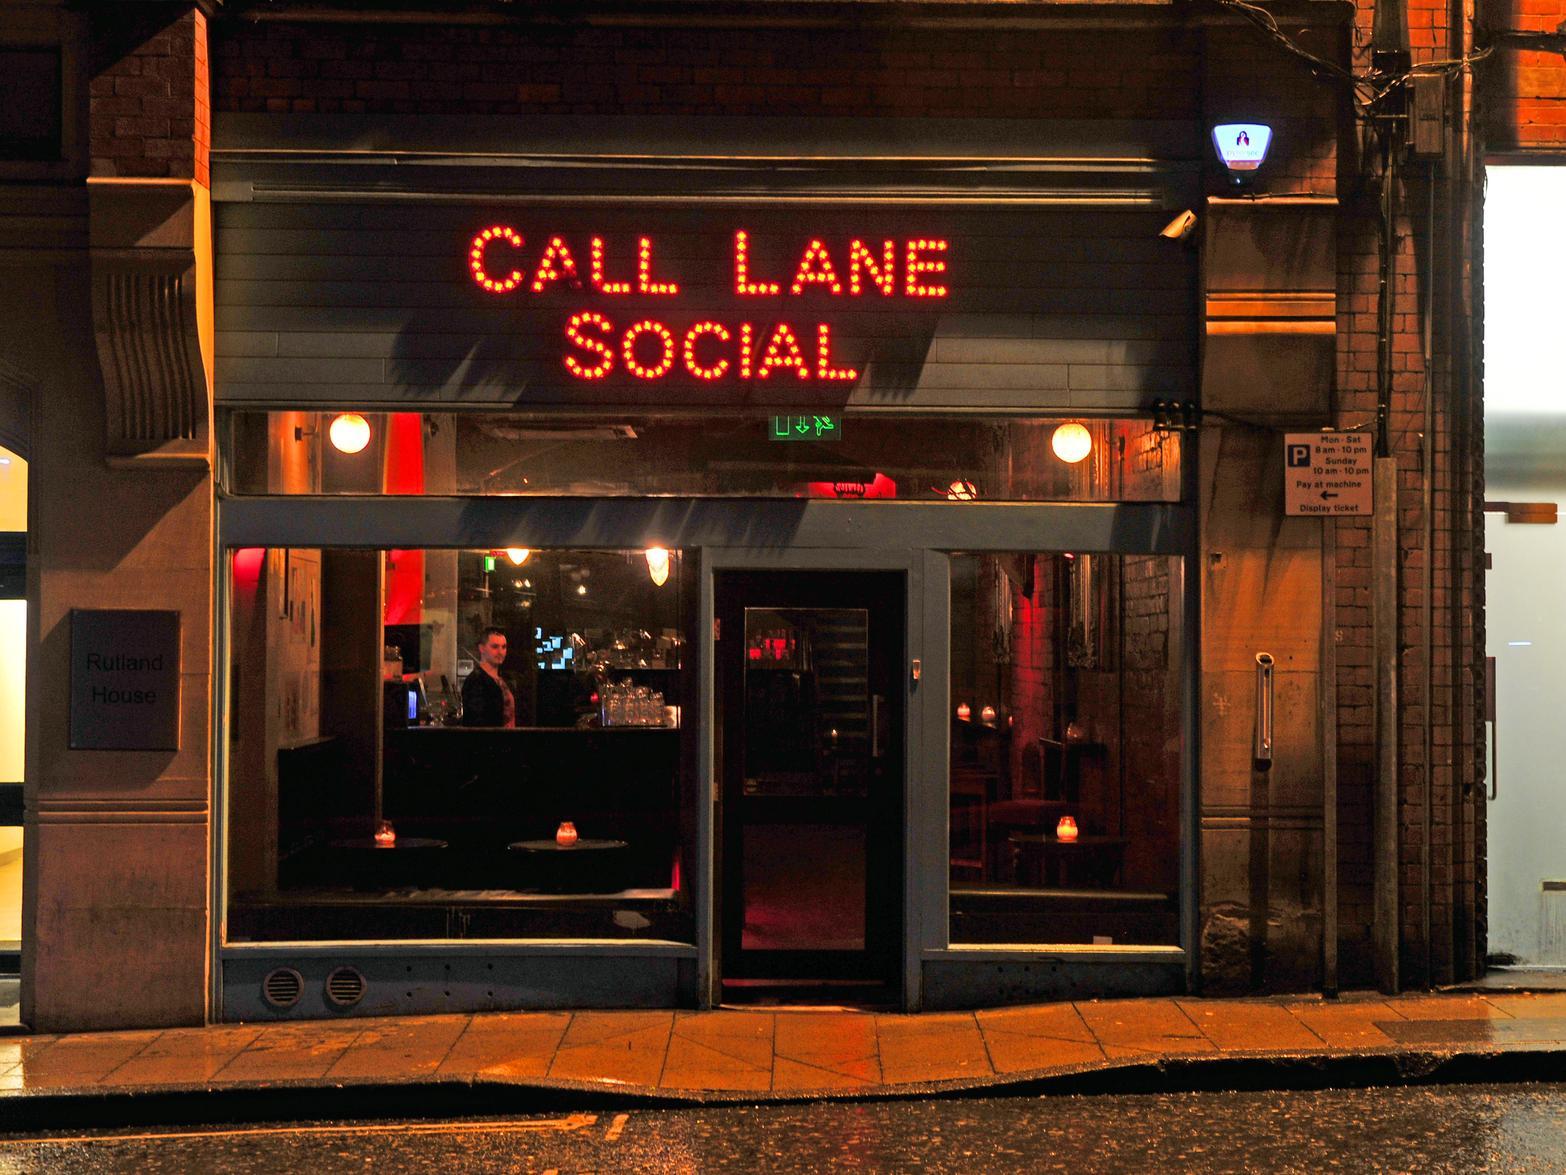 18 crimes were recorded at Call Lane Social in the nine month period. A spokesperson for Call Lane Social was contacted for comment.